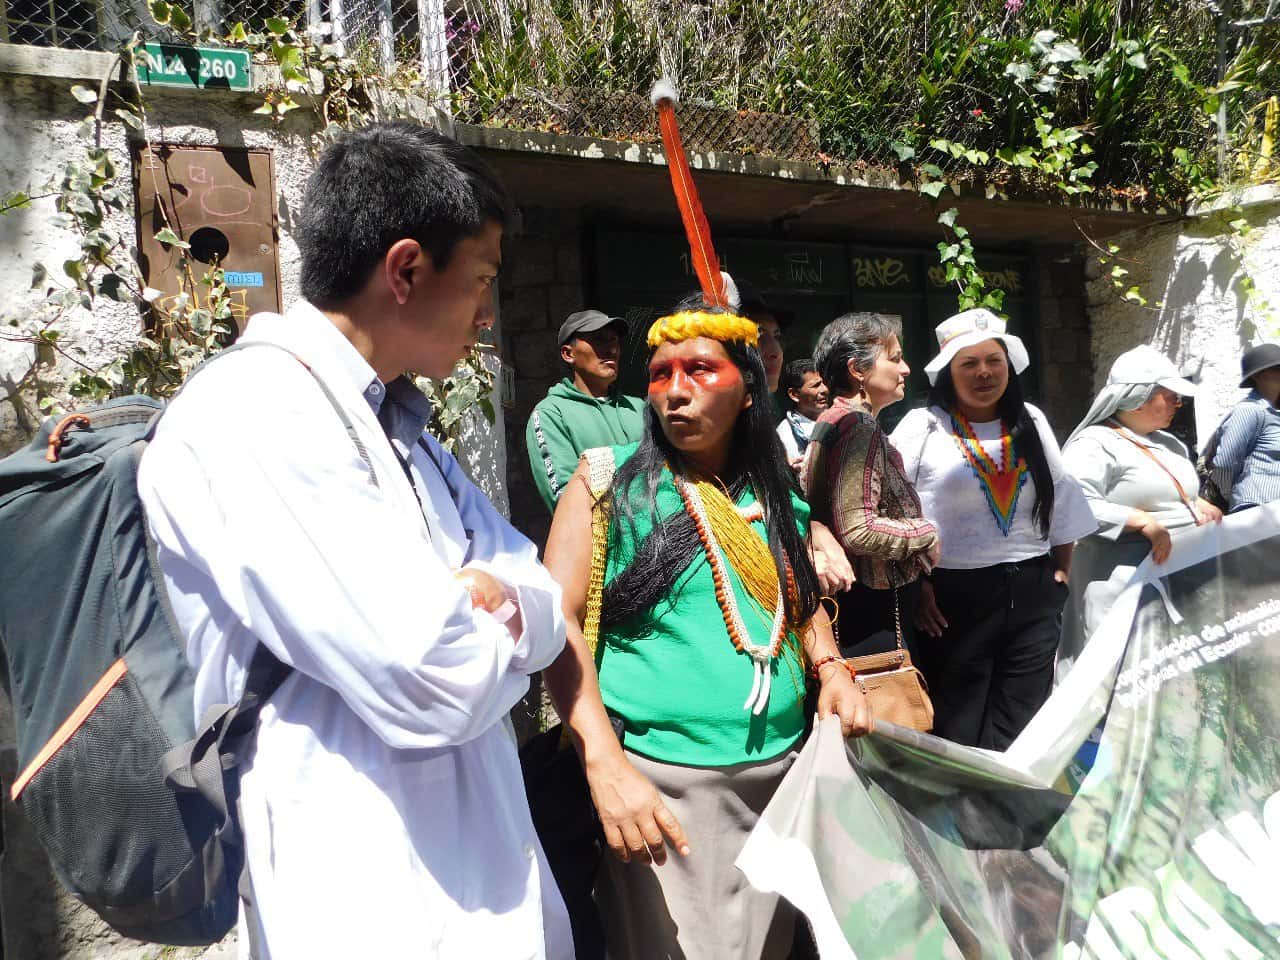 A rebel scientist chats with an indigenous protester during a rally